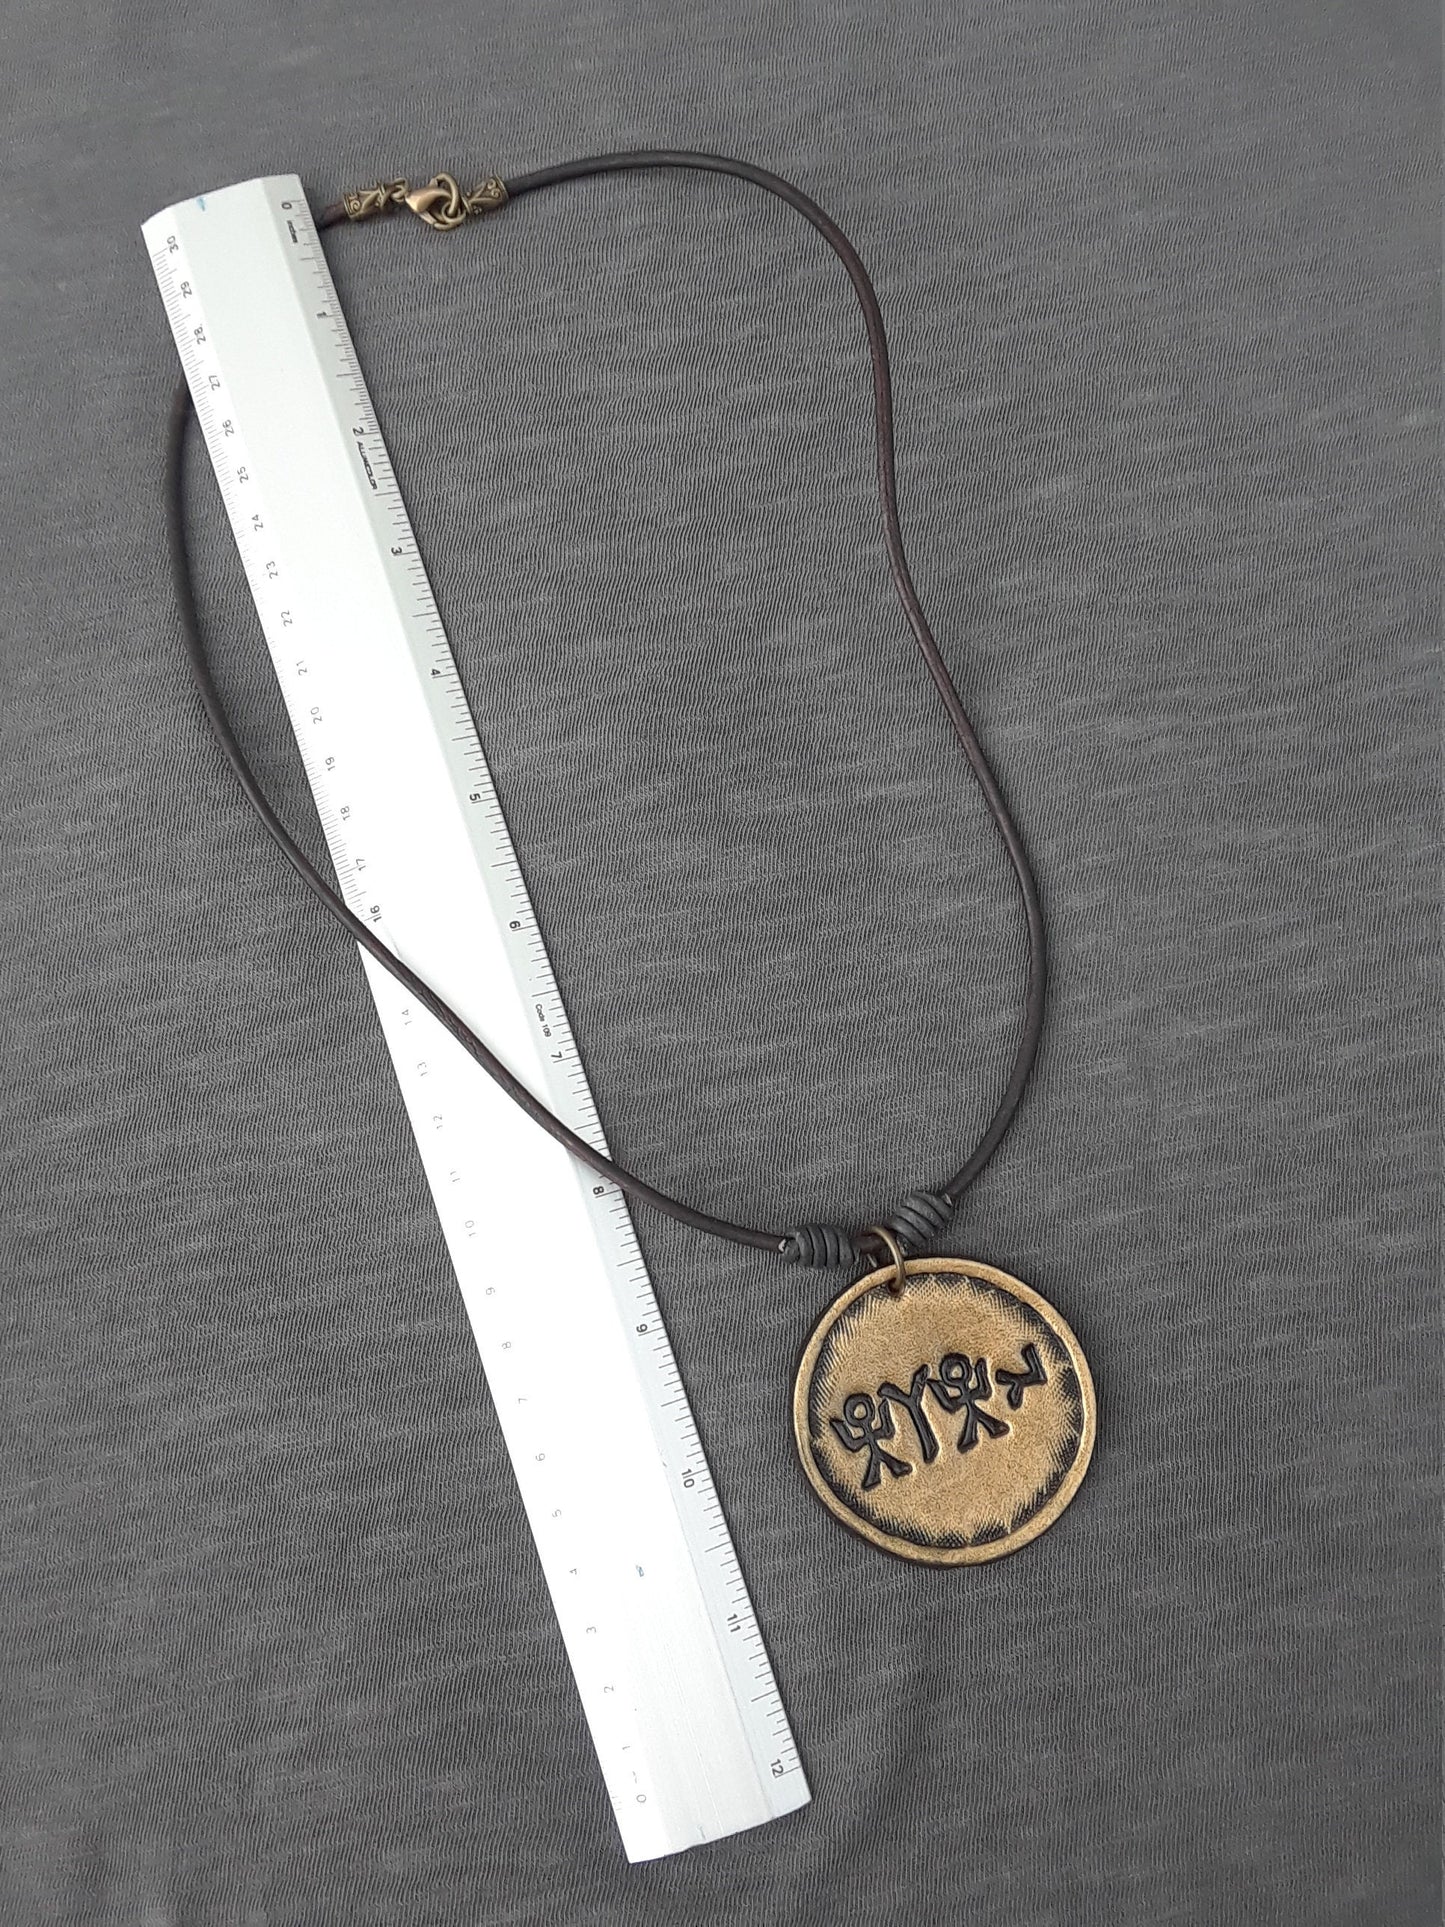 PENDANT-YHUH-Black on GOLD- Unique Leather Necklace With Abba's-Father's Kadosh Name In Ancient PictoGraphic Hebrew Letters